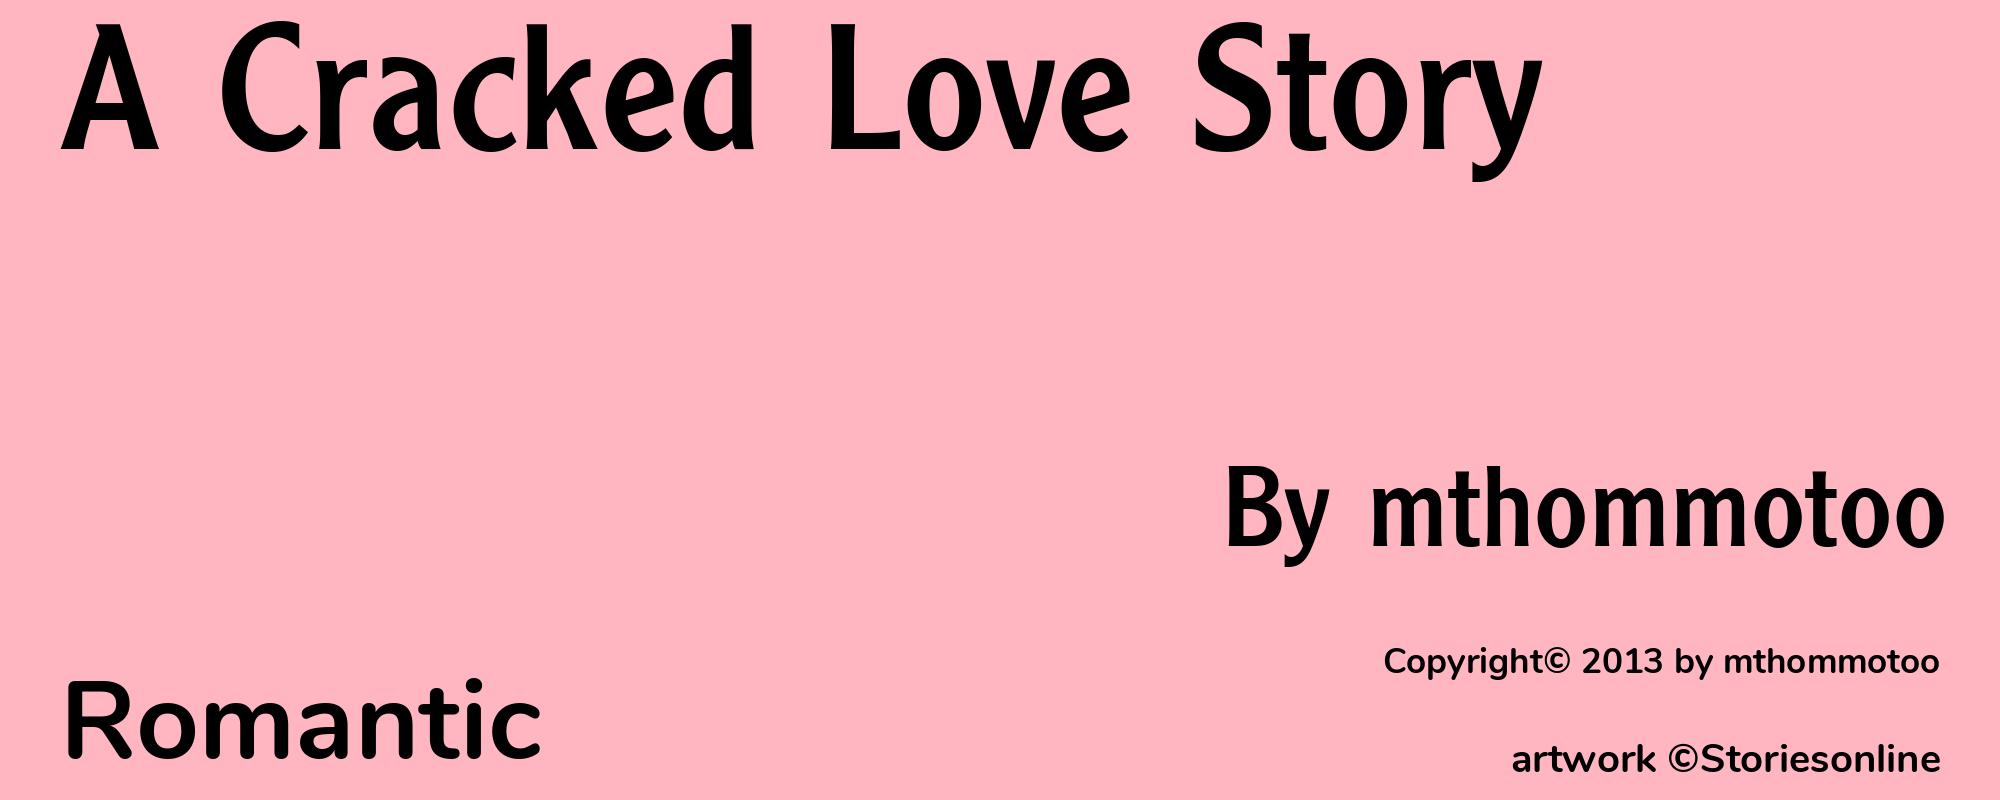 A Cracked Love Story - Cover